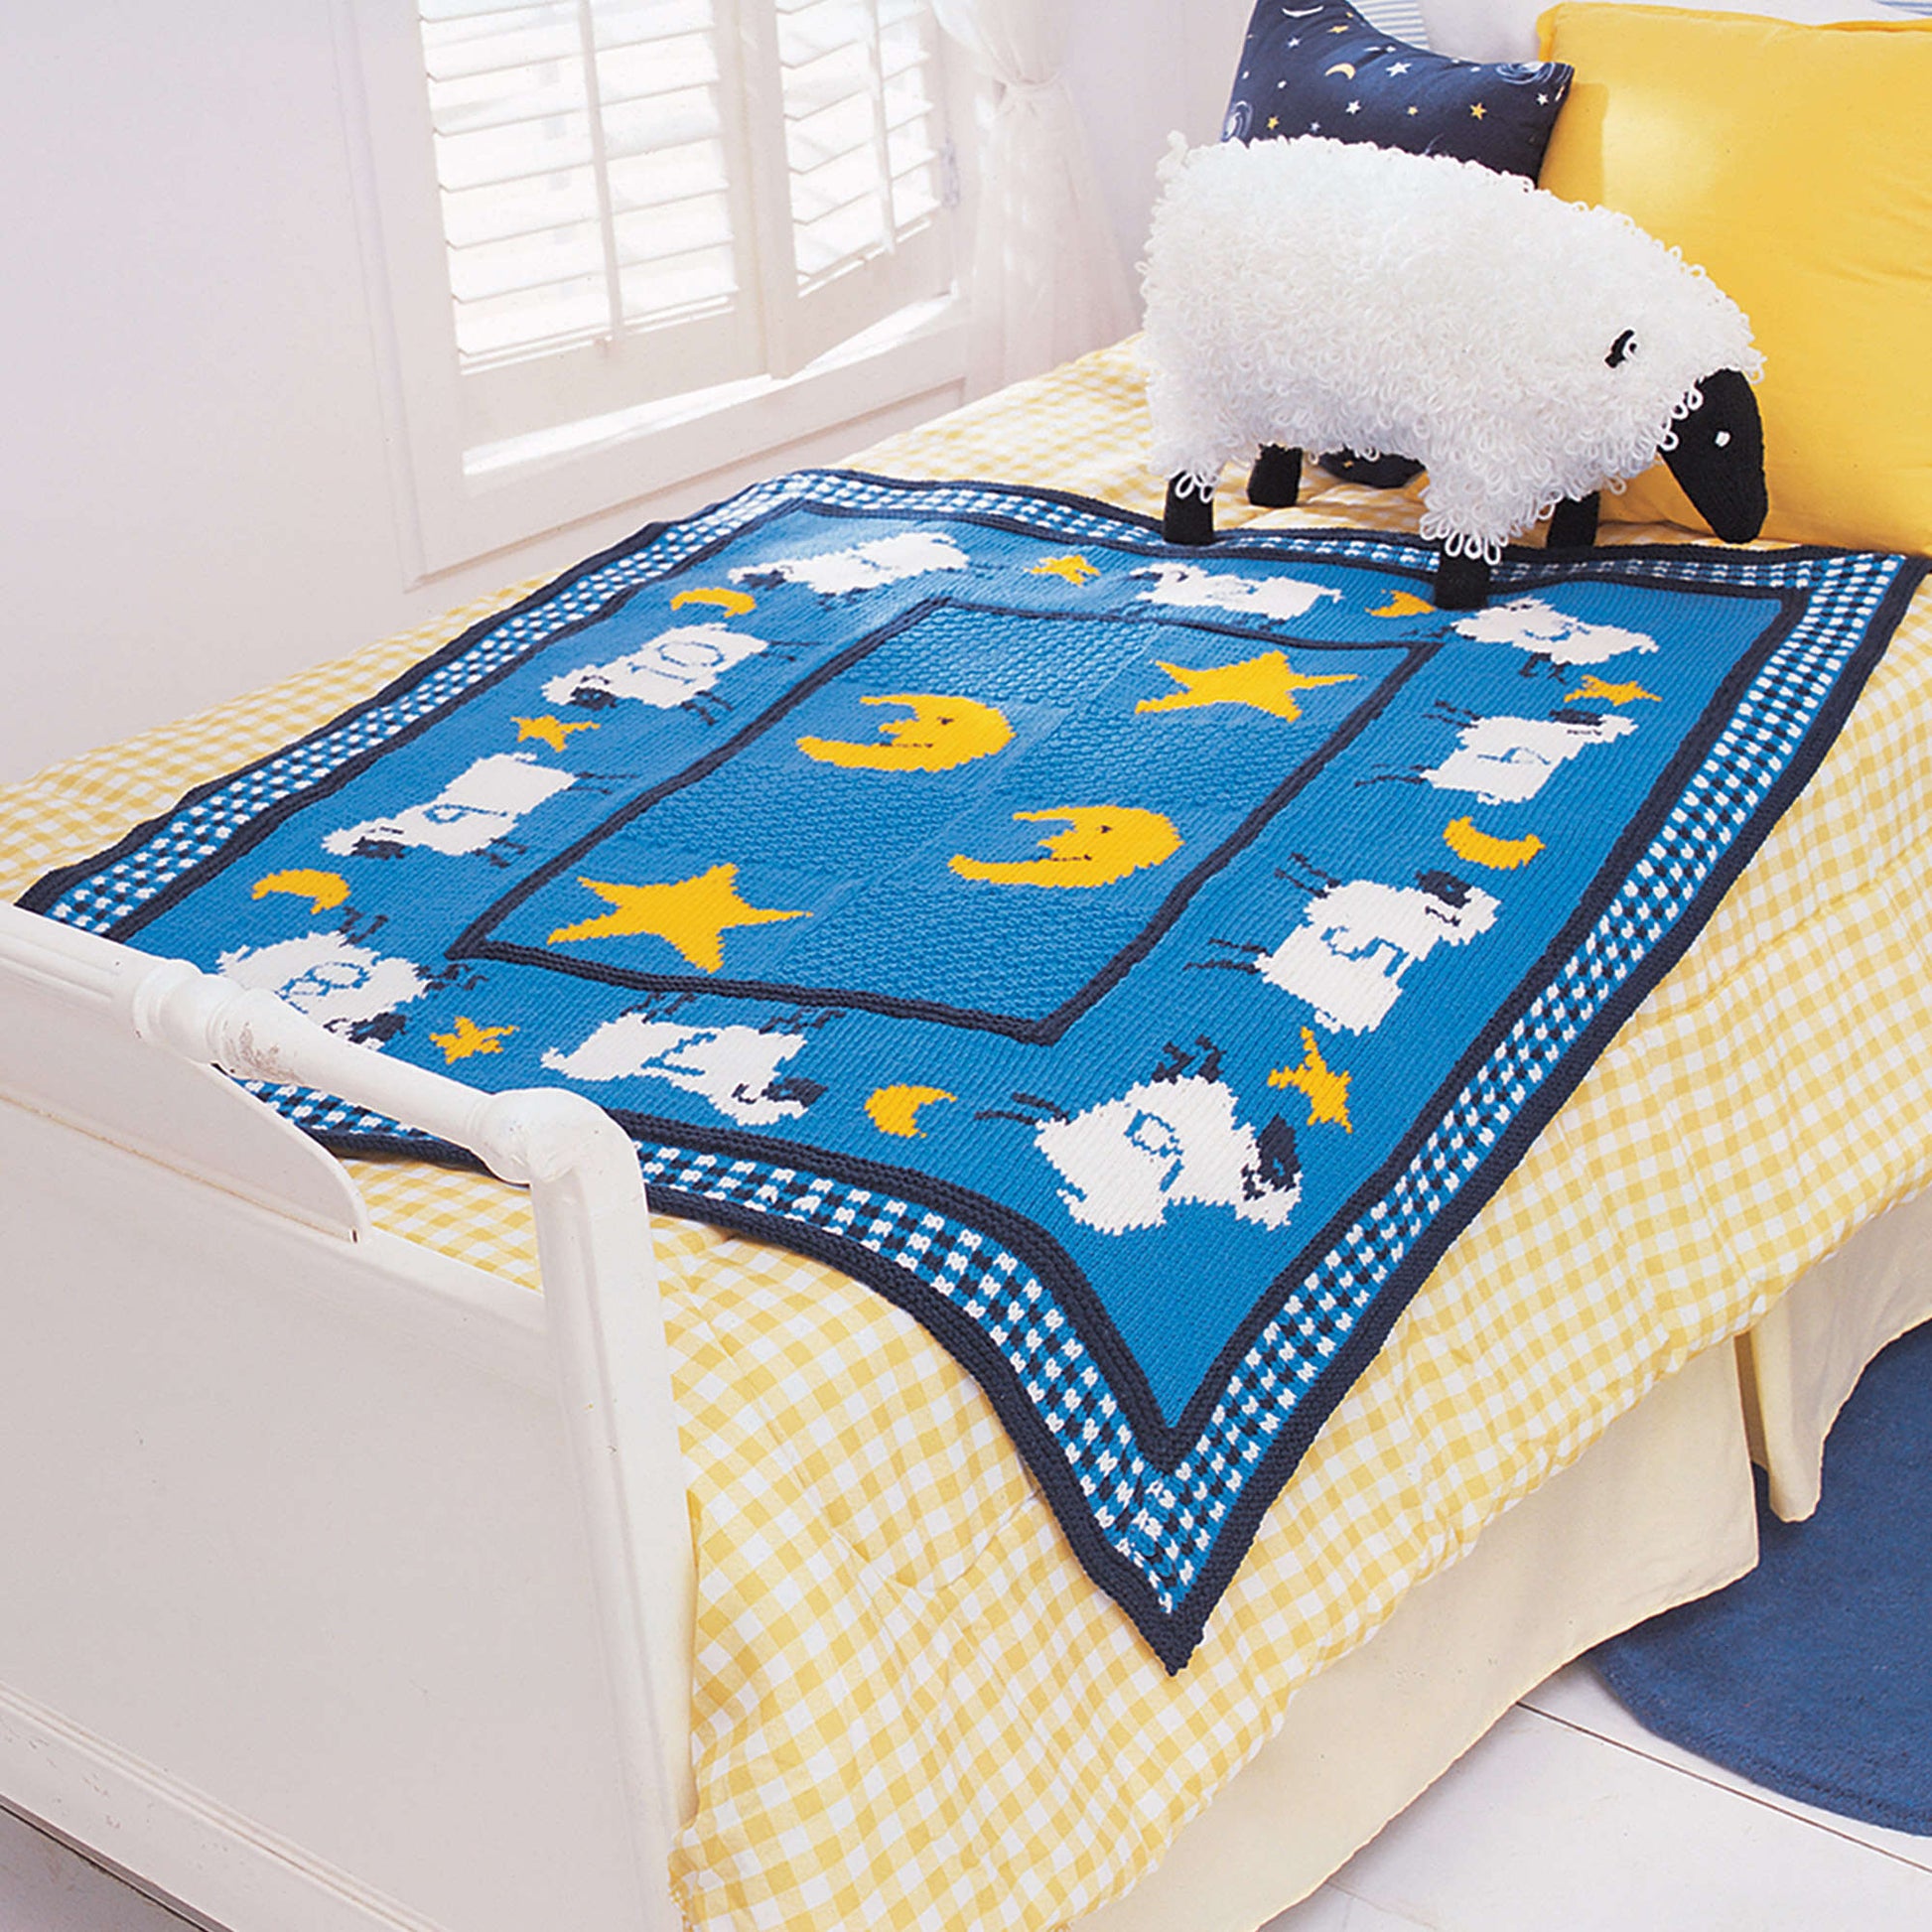 Free Patons Counting Sheep Knit Blanket Pattern